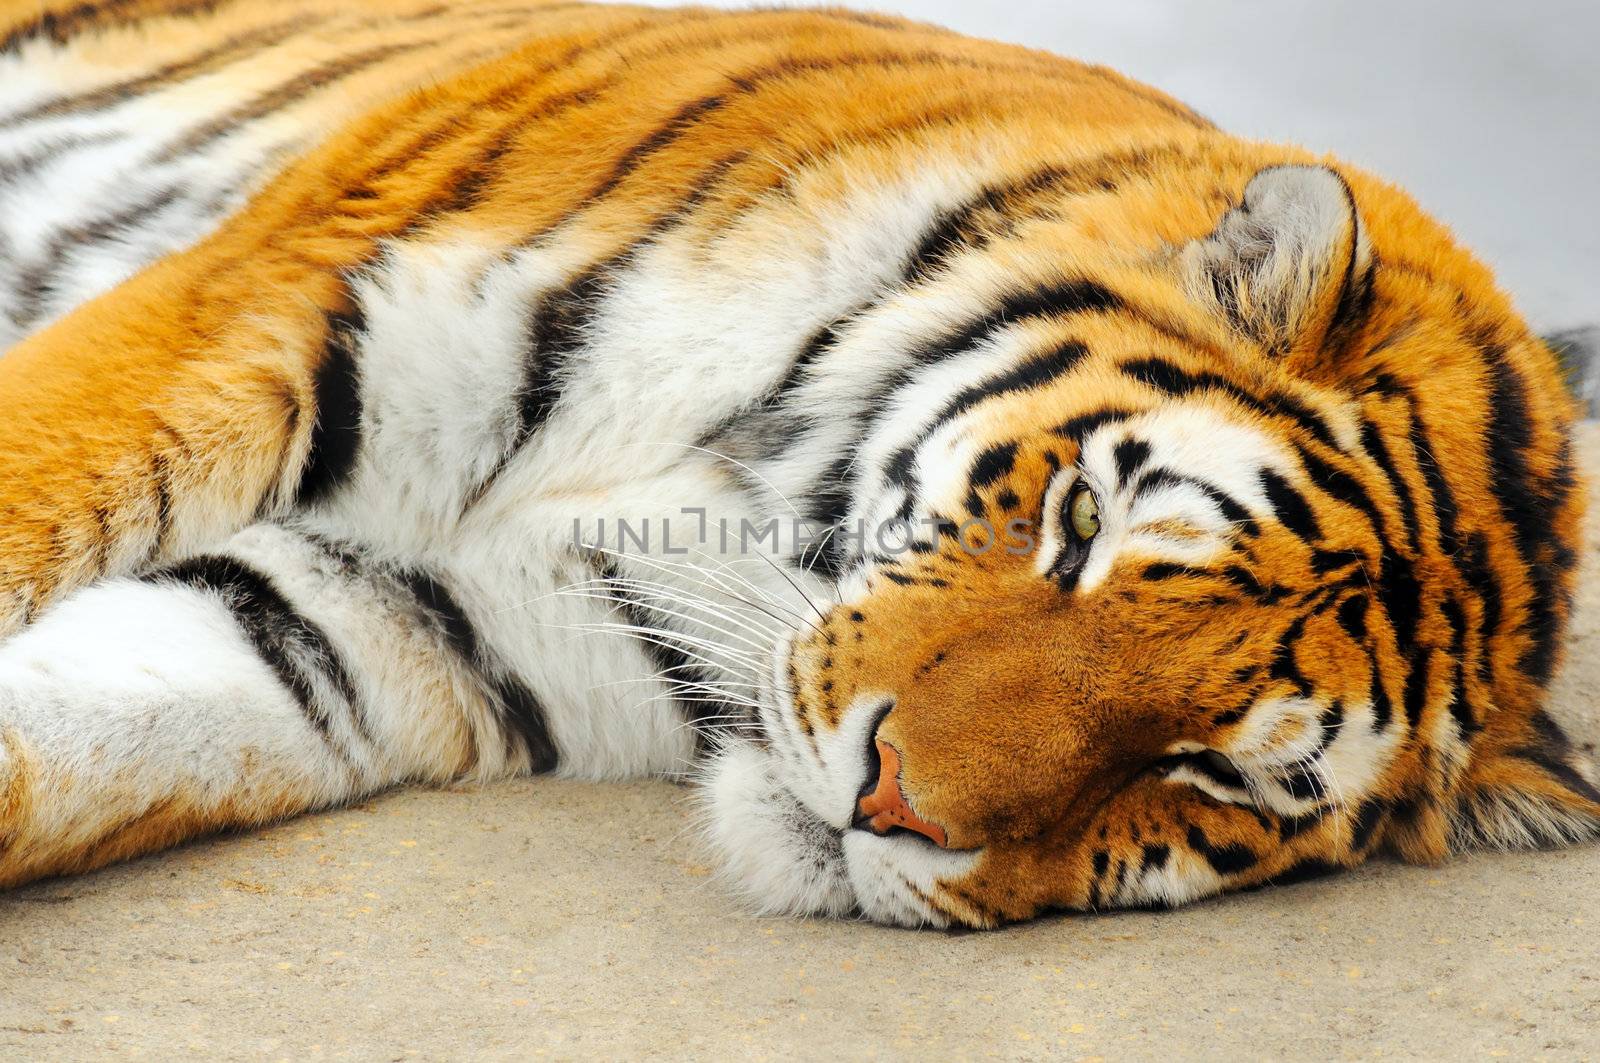 Sleeping tiger by Mirage3